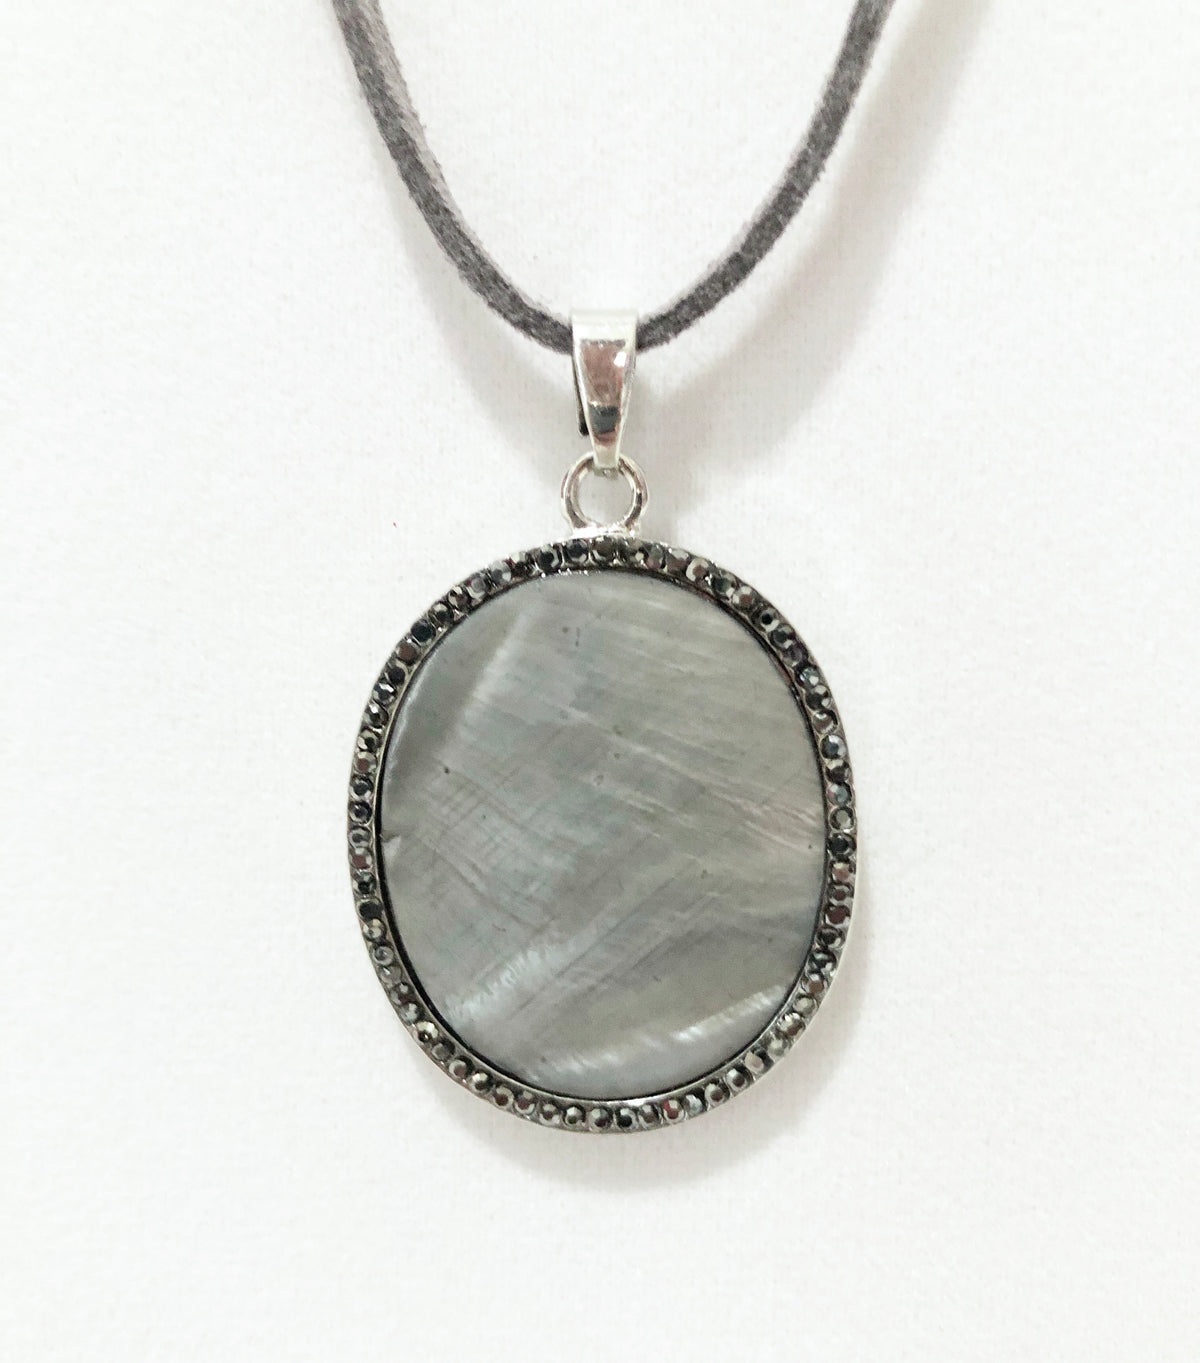 Grey Mother of Pearl Pendant Necklace